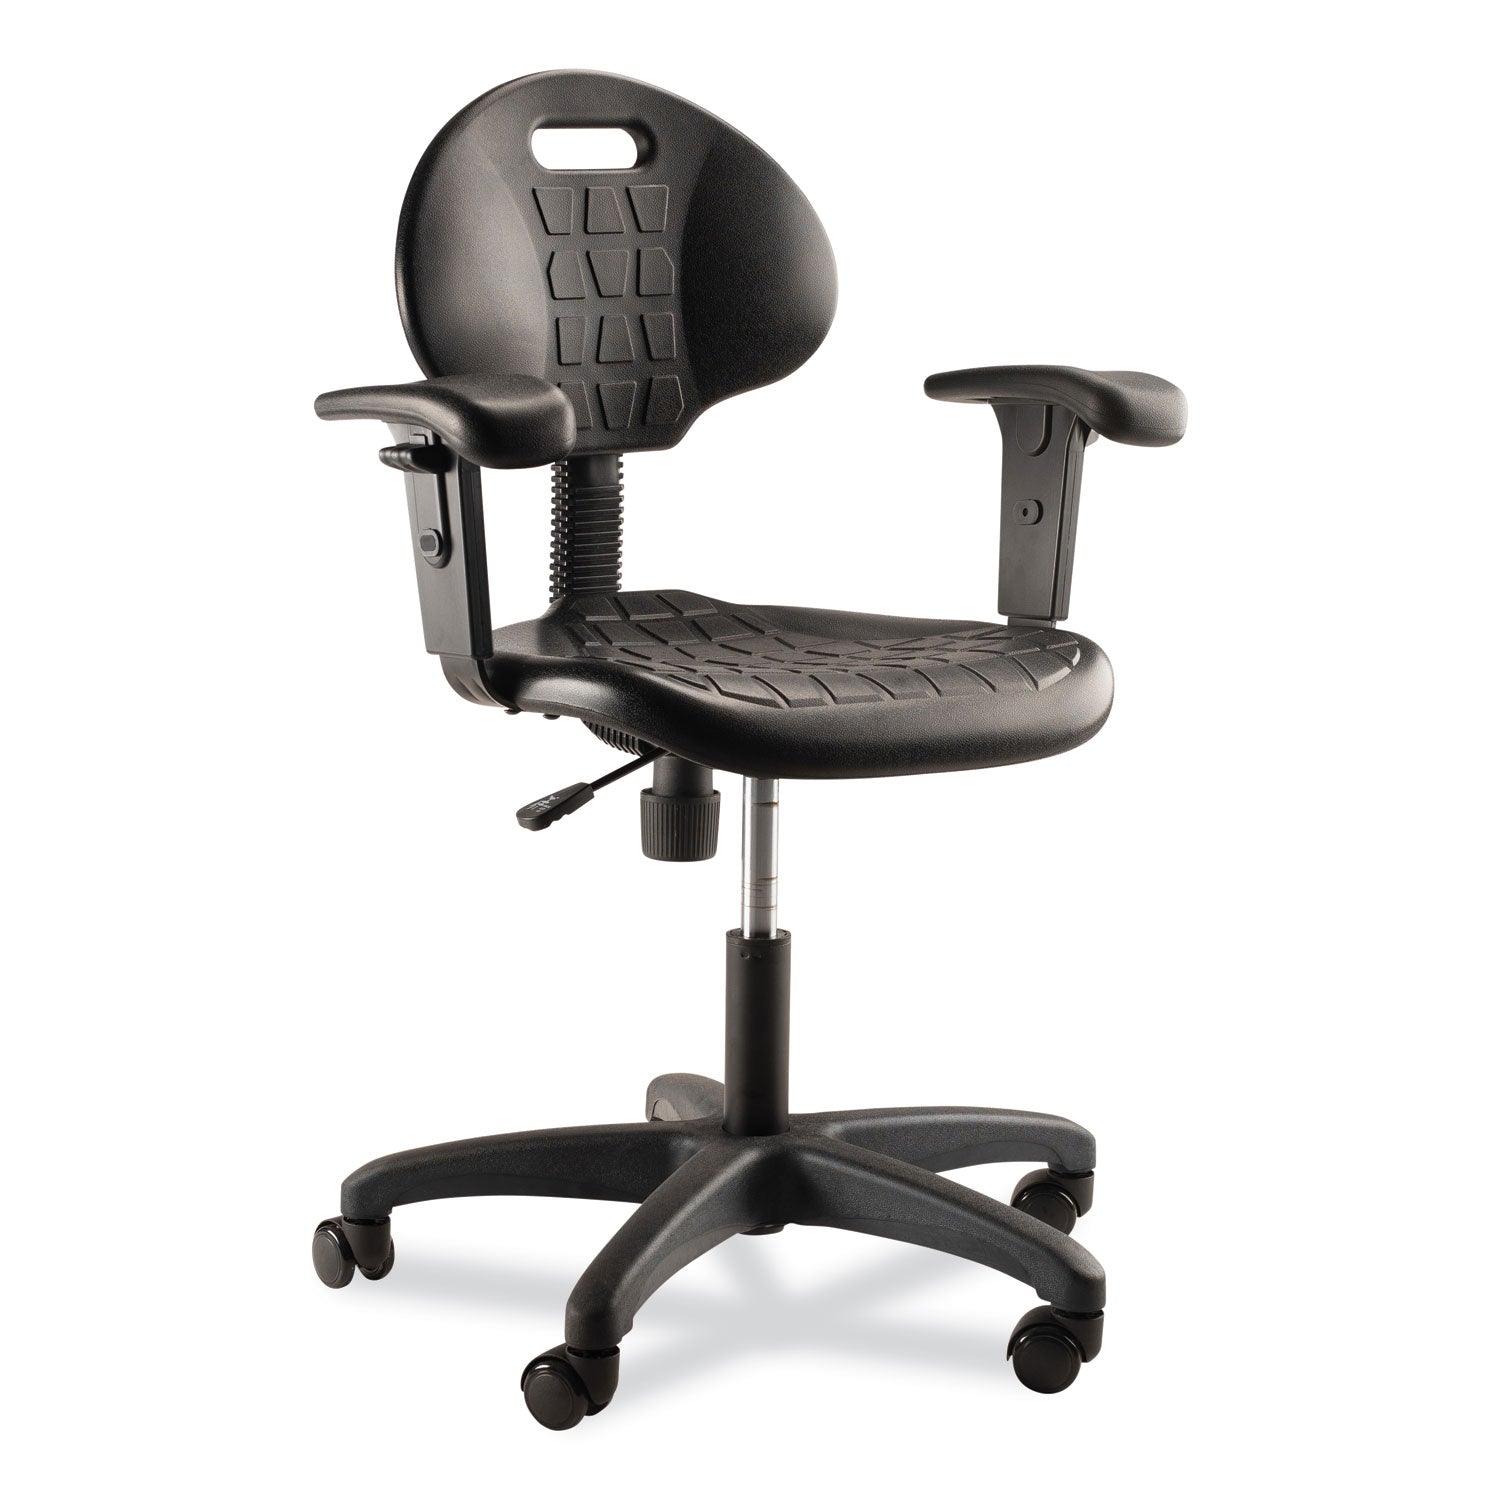 6700-series-polyurethane-adj-height-task-chair-w-arms-supports-300lb-16-21-seat-ht-black-seat-baseships-in-1-3-bus-days_nps6716hba - 1